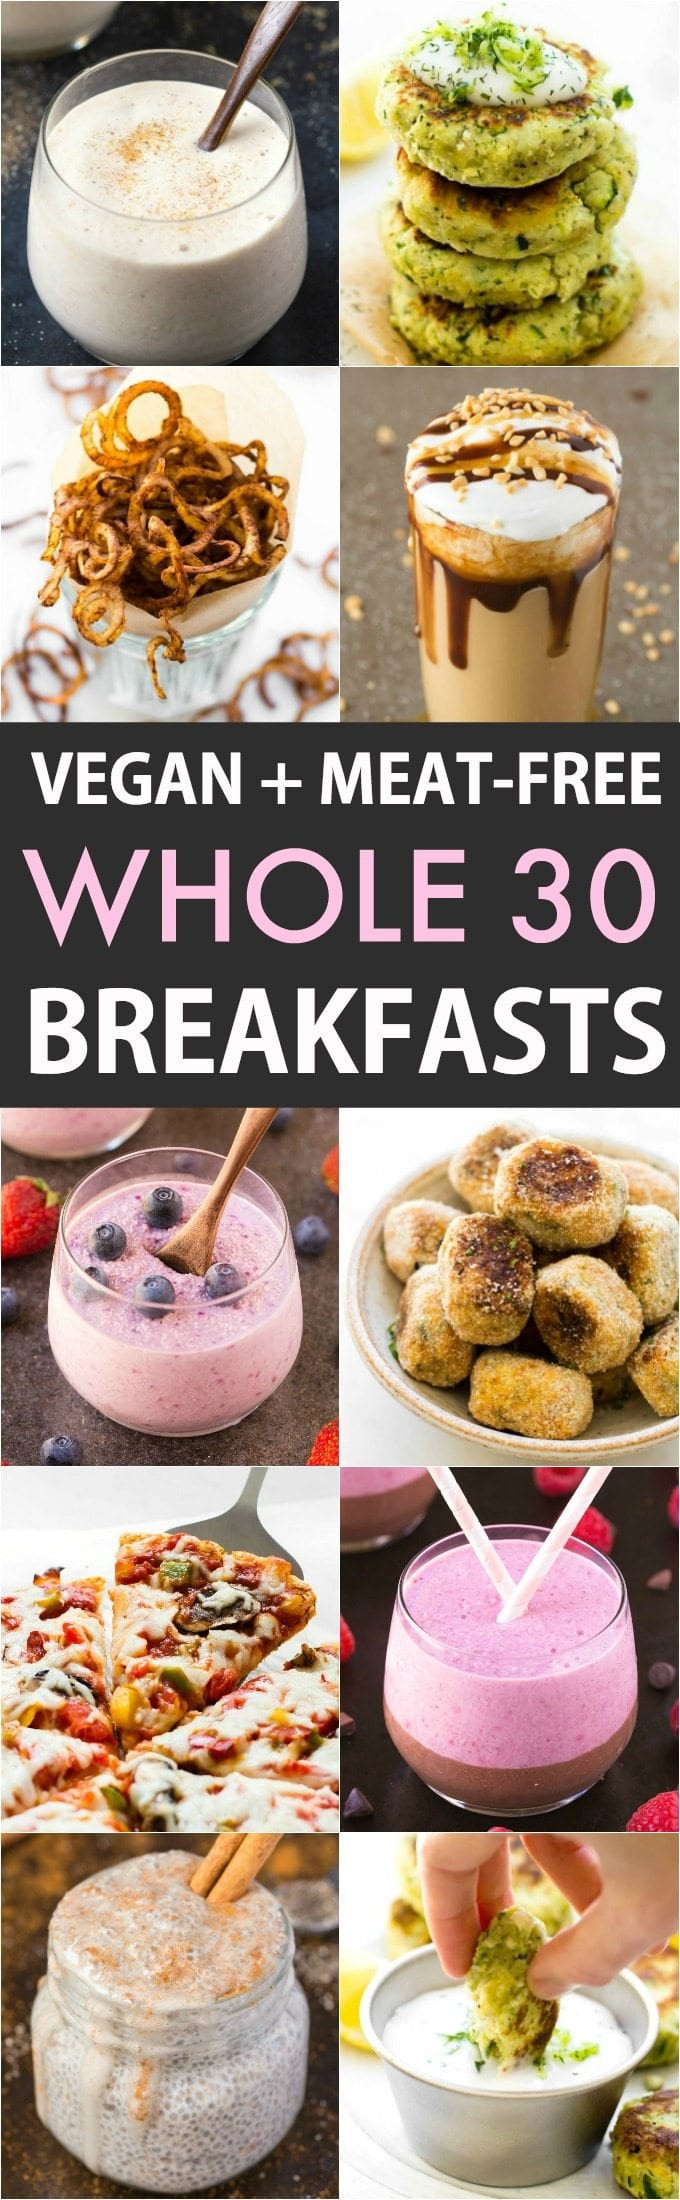 Whole30 Brunch Recipes
 The Best Meat Free Vegan Whole30 Breakfast Recipes and Ideas